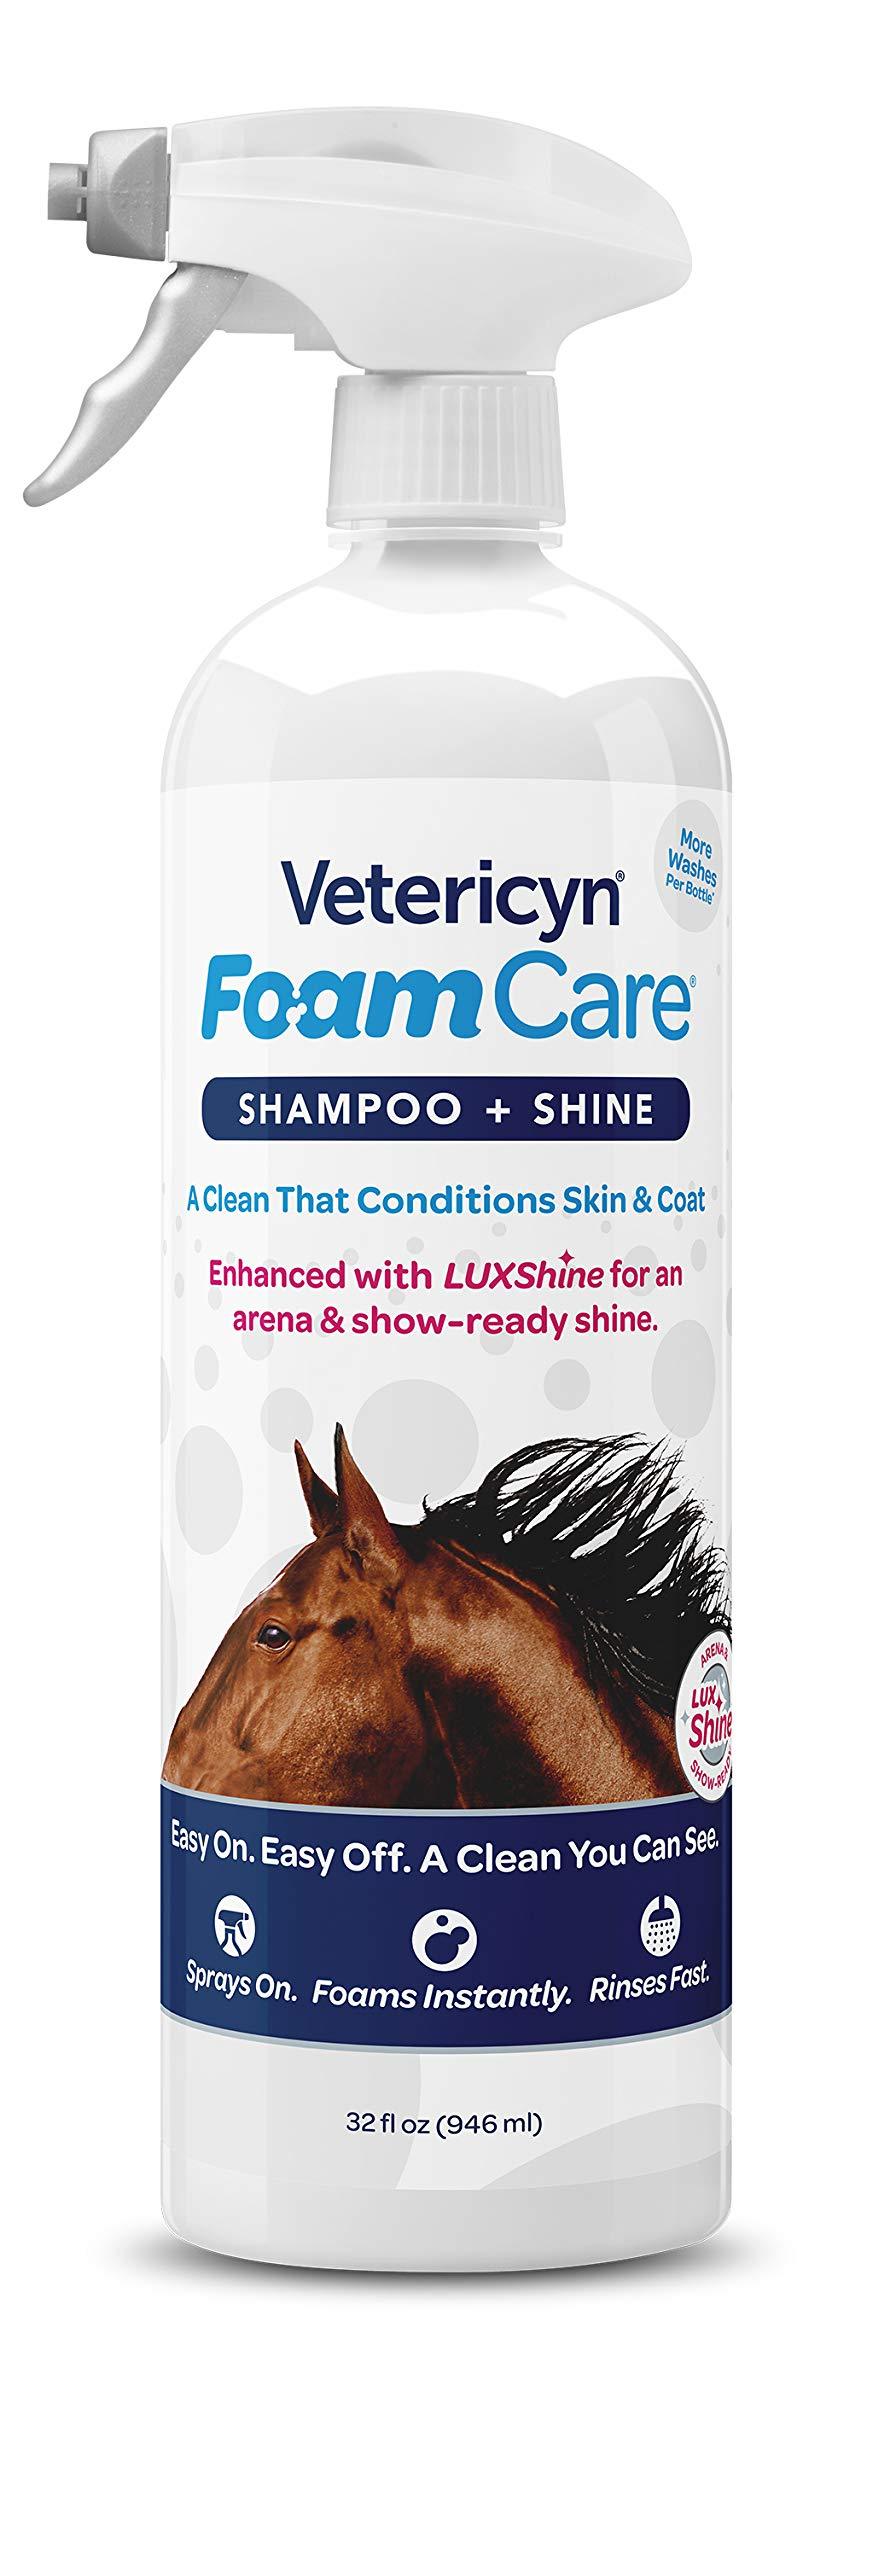 [Australia] - Vetericyn FoamCare Horse Shampoo | Equine Shampoo with Aloe to Promote Healthy Skin and Coat - Paraben Free - Cleans, Moisturizes, and Conditions Horse's Coat - Instant Foam Shampoo - 32-Ounce 